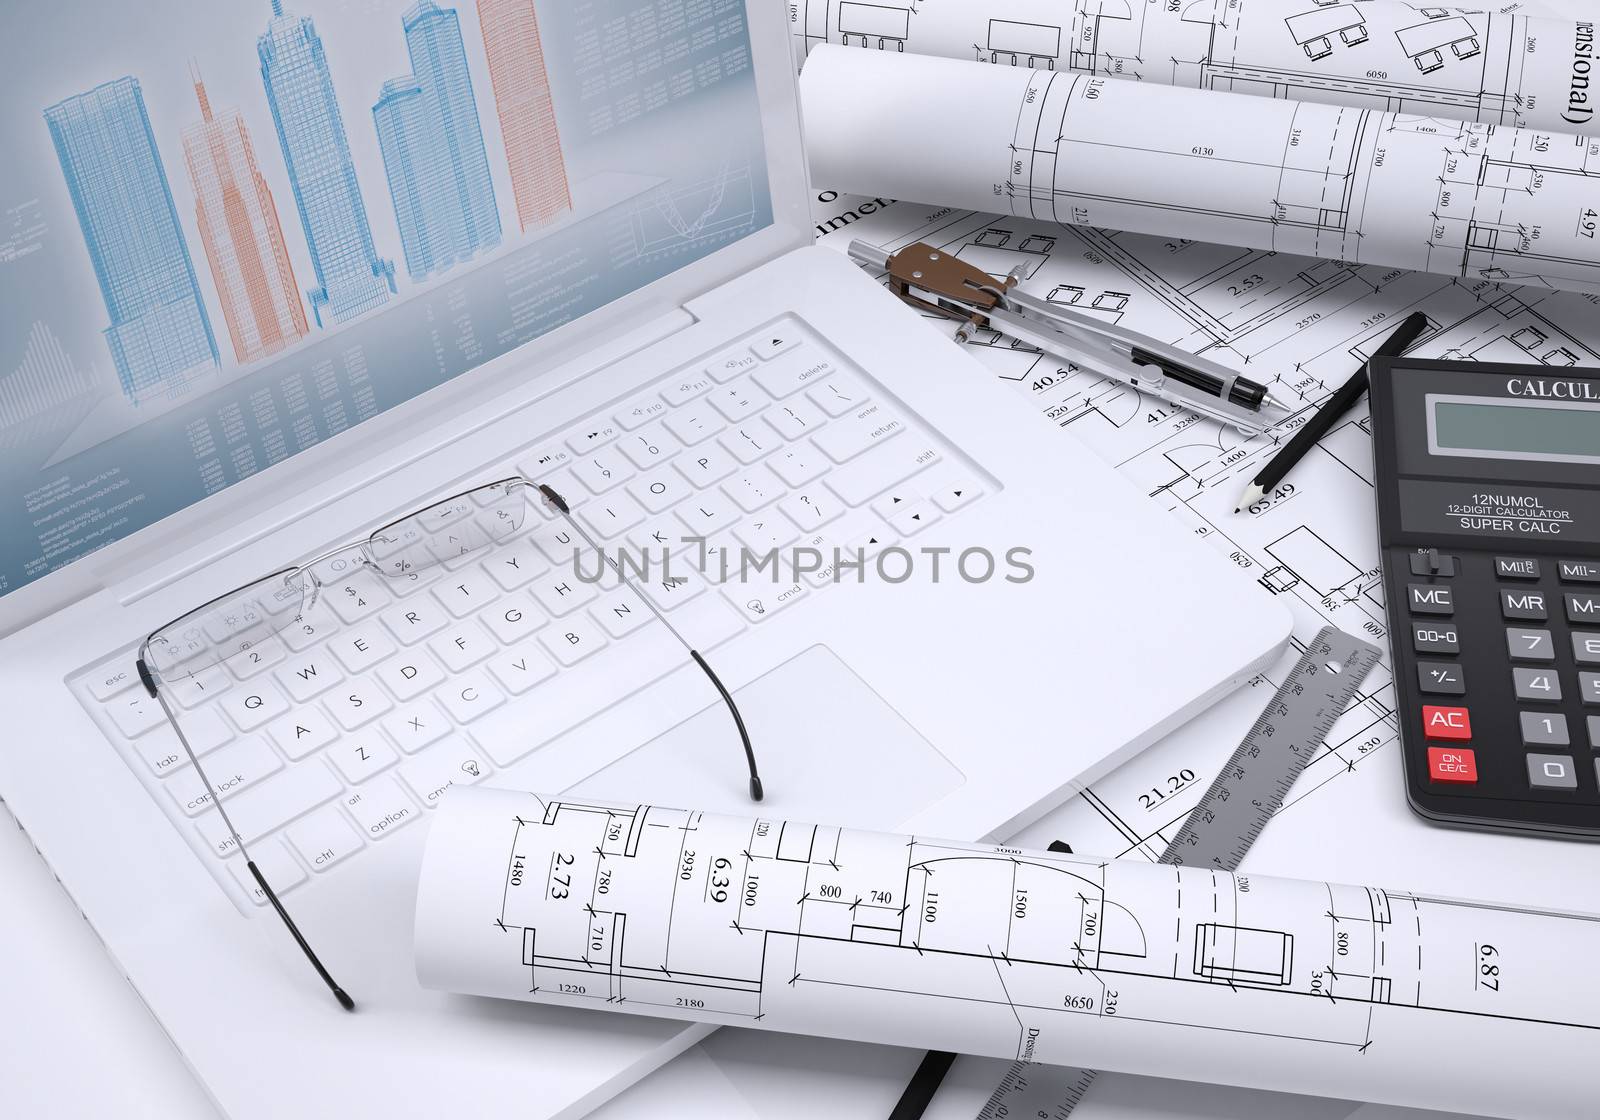 The book, calculator, paper and laptop. 3d rendering. The concept of new technologies